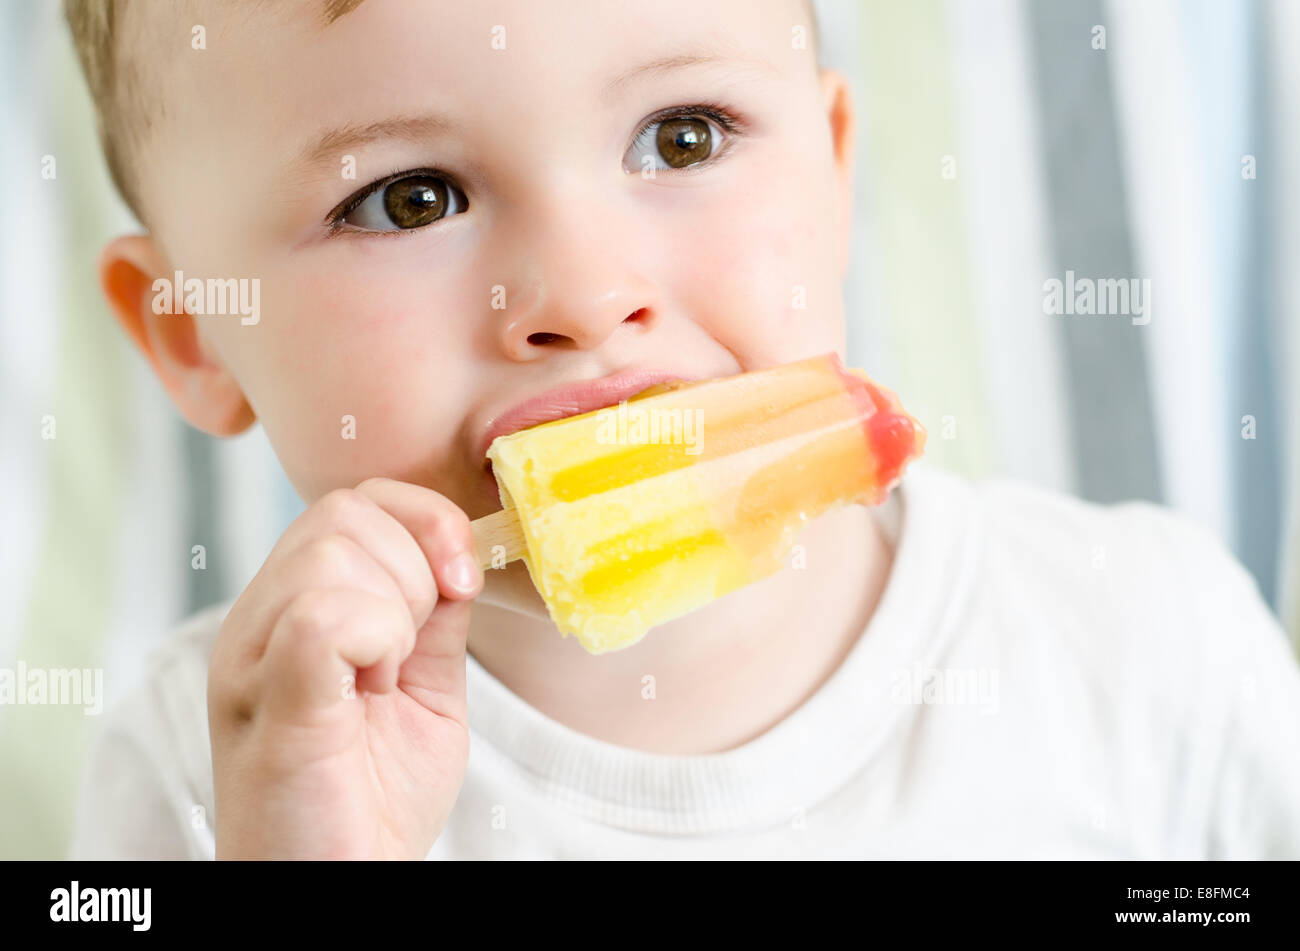 Baby boy eating ice lolly Stock Photo